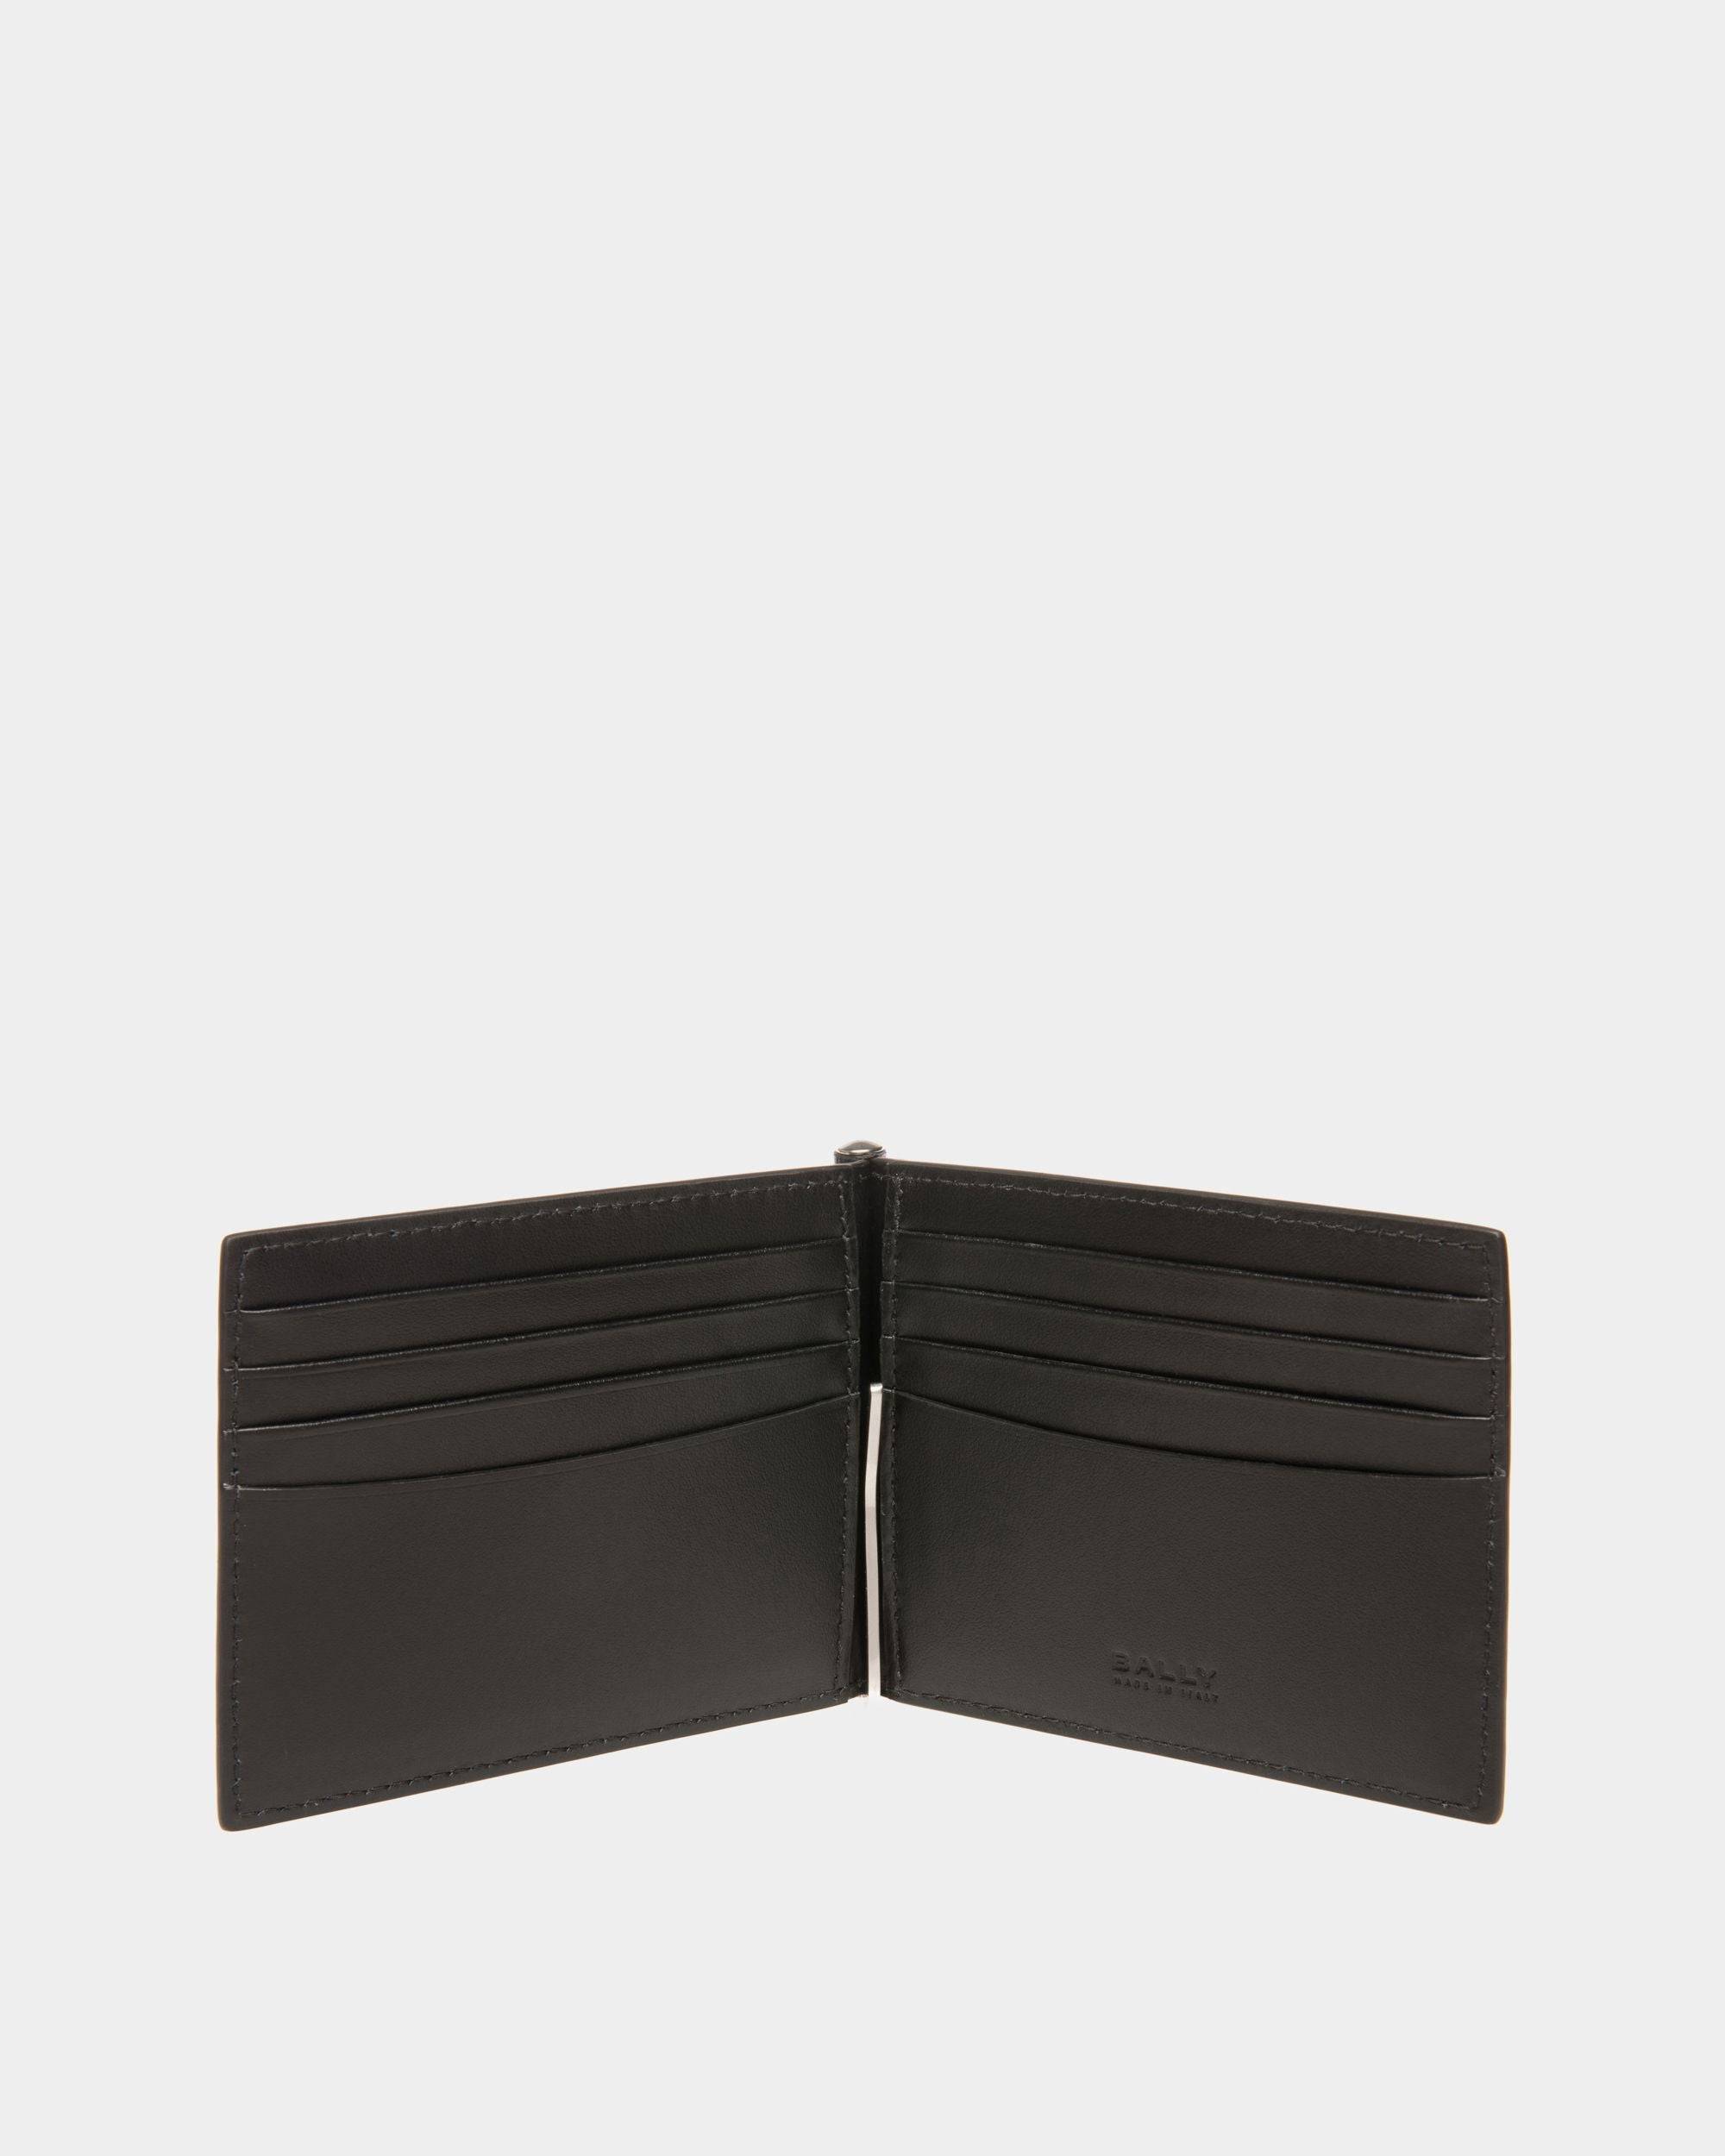 Banque Bi-fold Clip | Men's Wallets And Coin Purses | Black Leather | Bally | Still Life Open / Inside